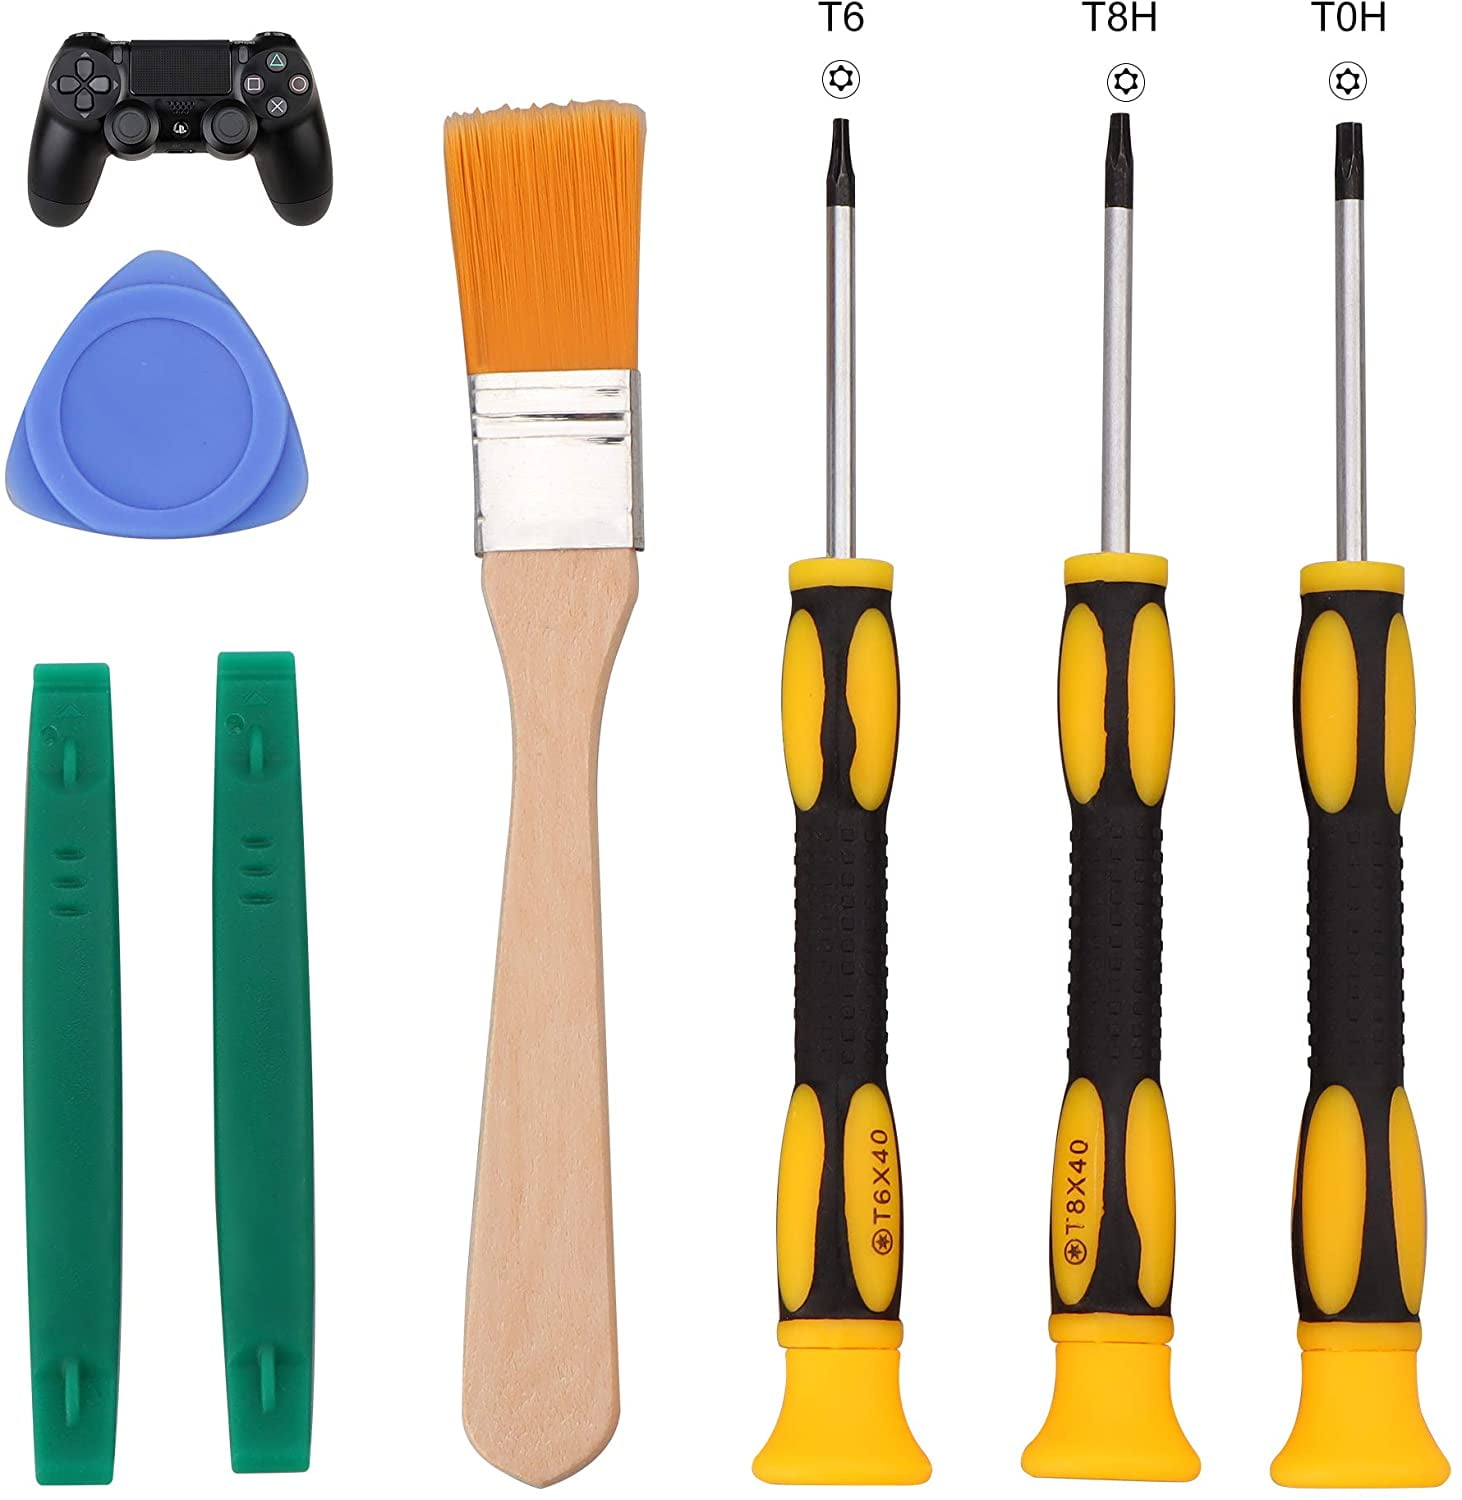 15+ IP Puller & IP Grabber Tools For Xbox, PS4/5 and PC